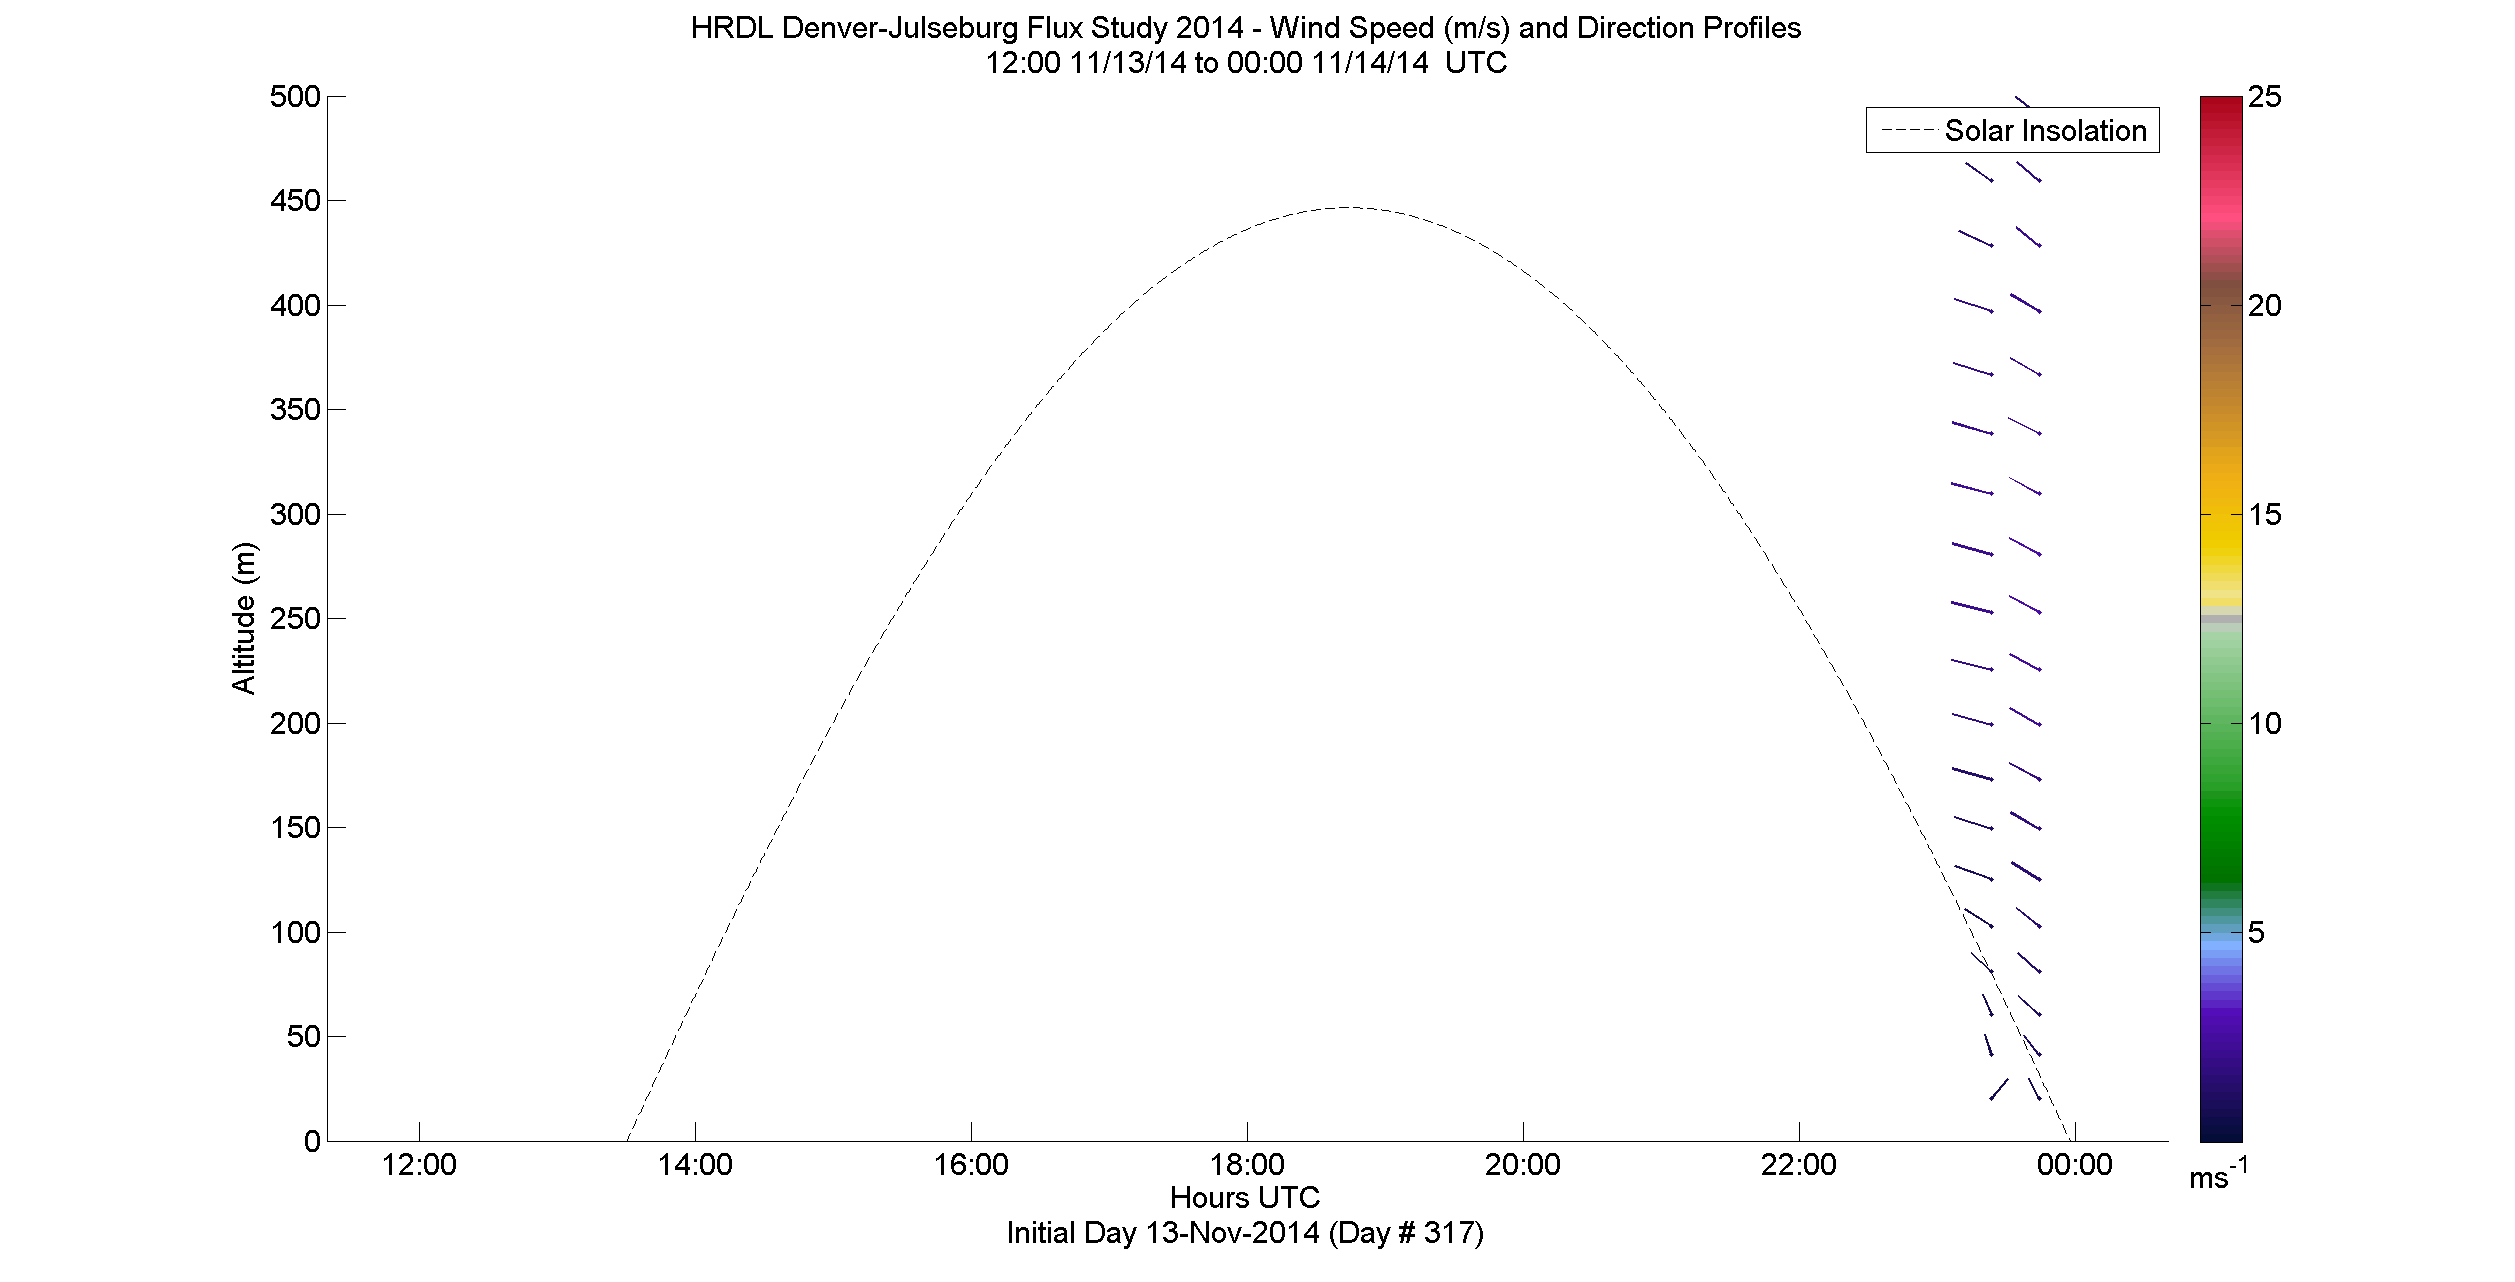 HRDL speed and direction profile - November 13 pm